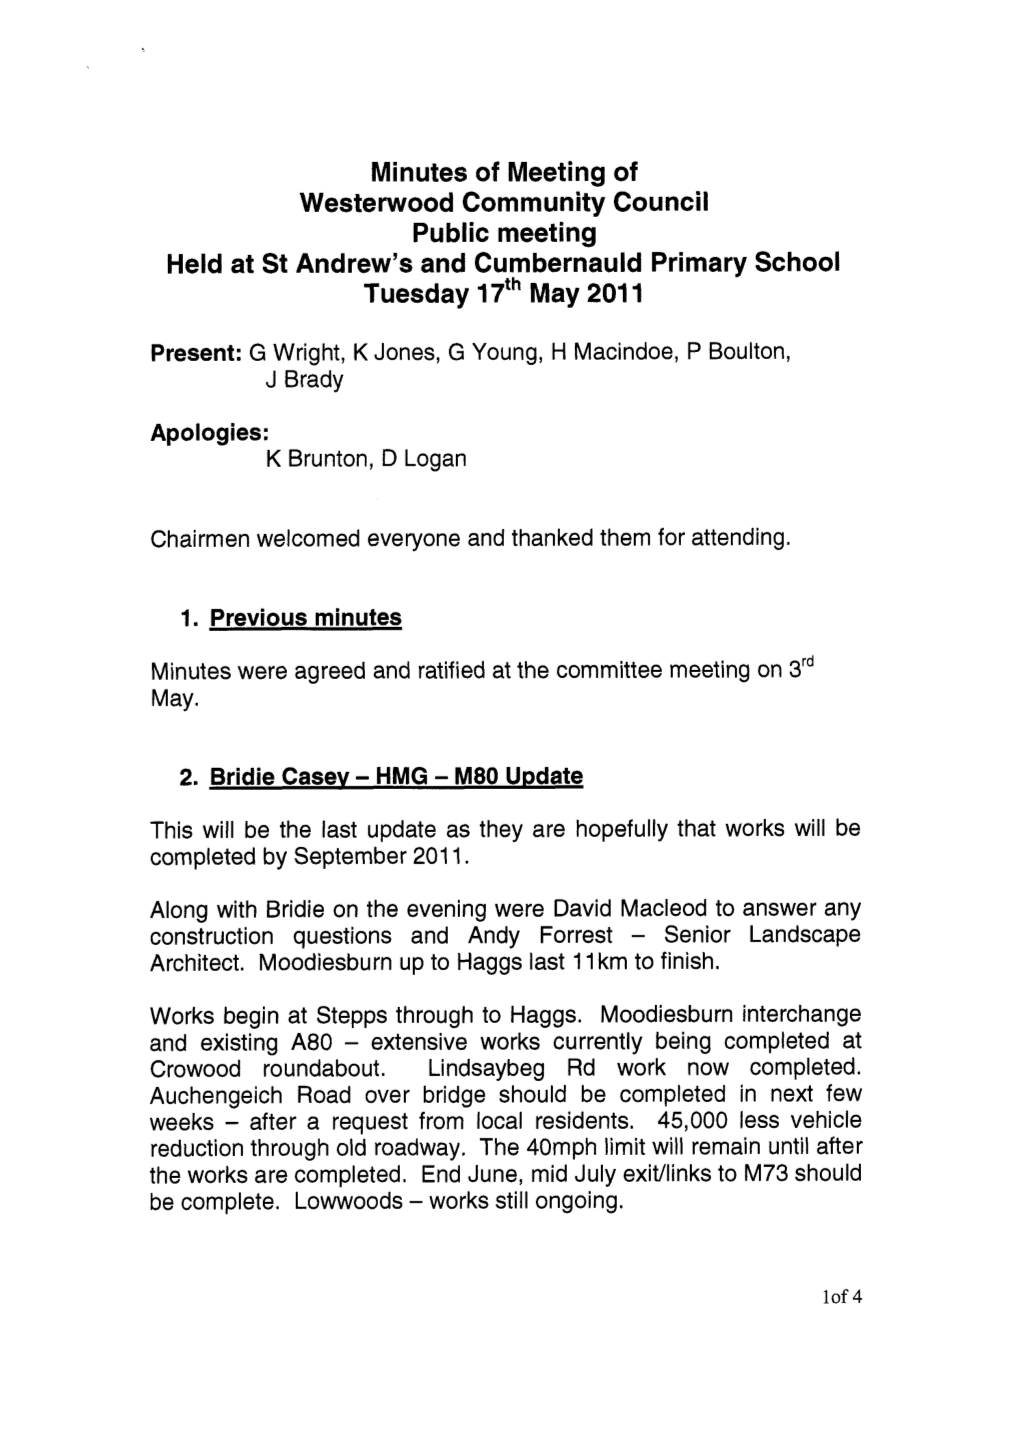 Minutes of Meeting of Westerwood Community Council Public Meeting Held at St Andrew's and Cumbernauld Primary School Tuesday 17Fhmay 201 1